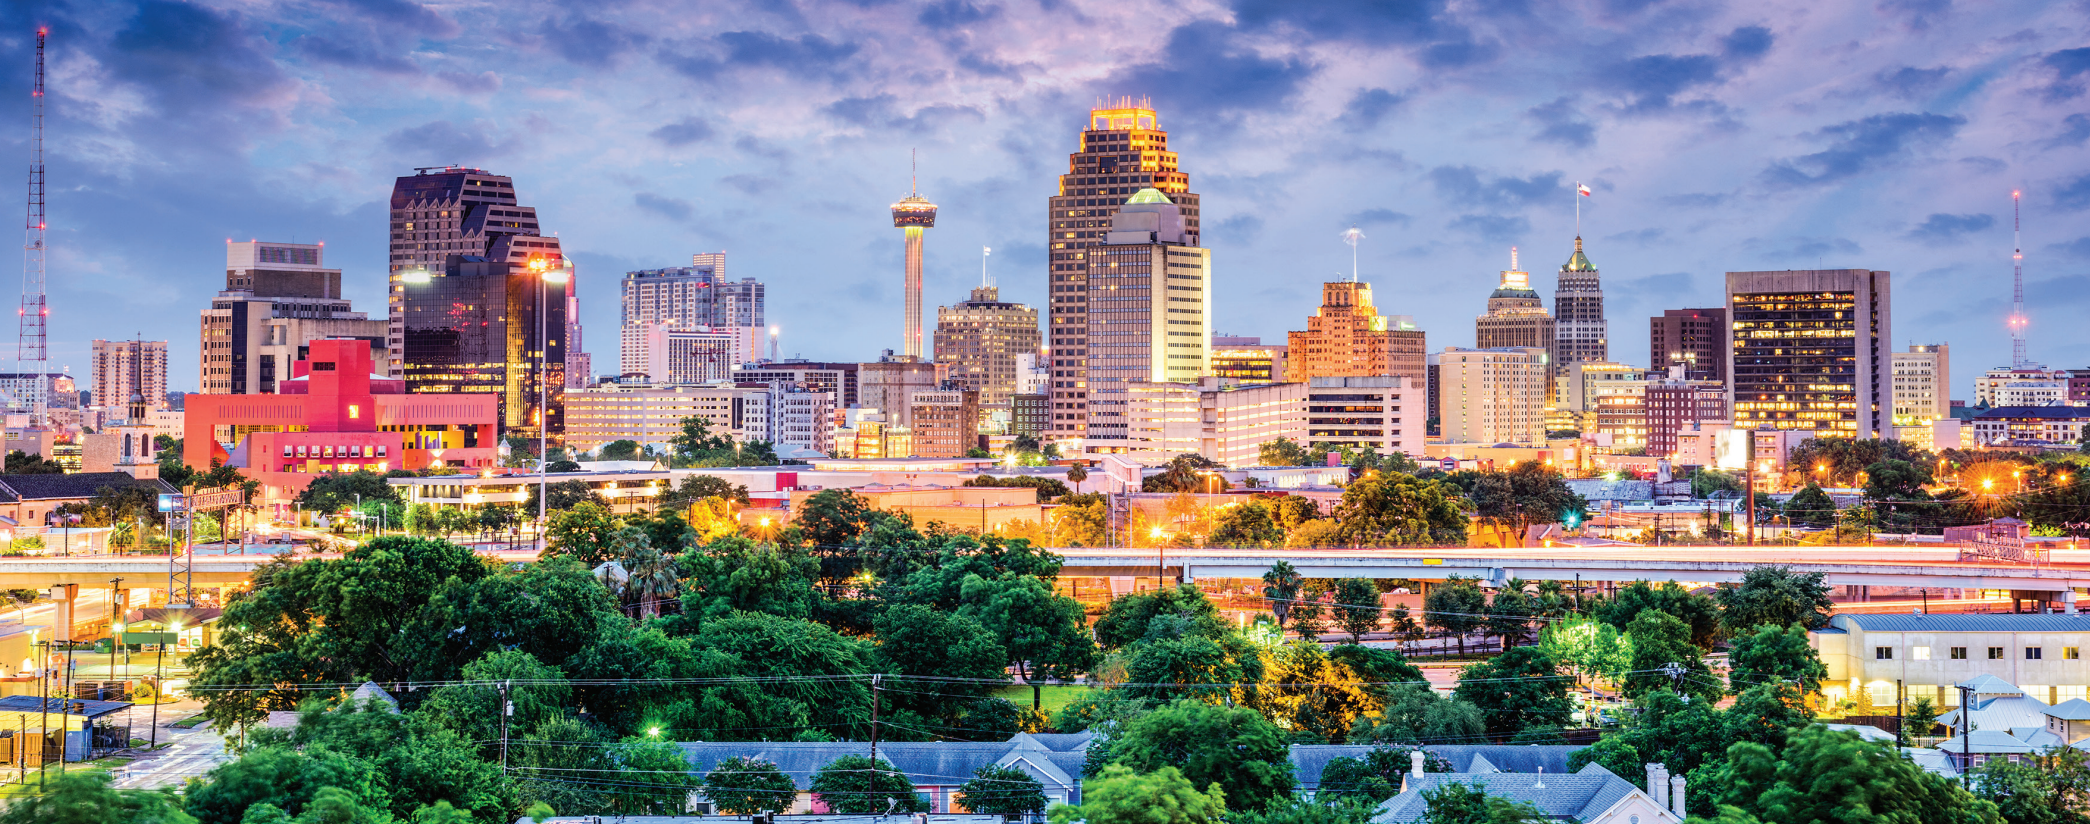 The American Society of Retina Specialists (ASRS) will host its 39th Annual Scientifi c Meeting from October 8-12, 2021, at the JW Marriott San Antonio Hill Country Resort and Spa in San Antonio, Texas. 